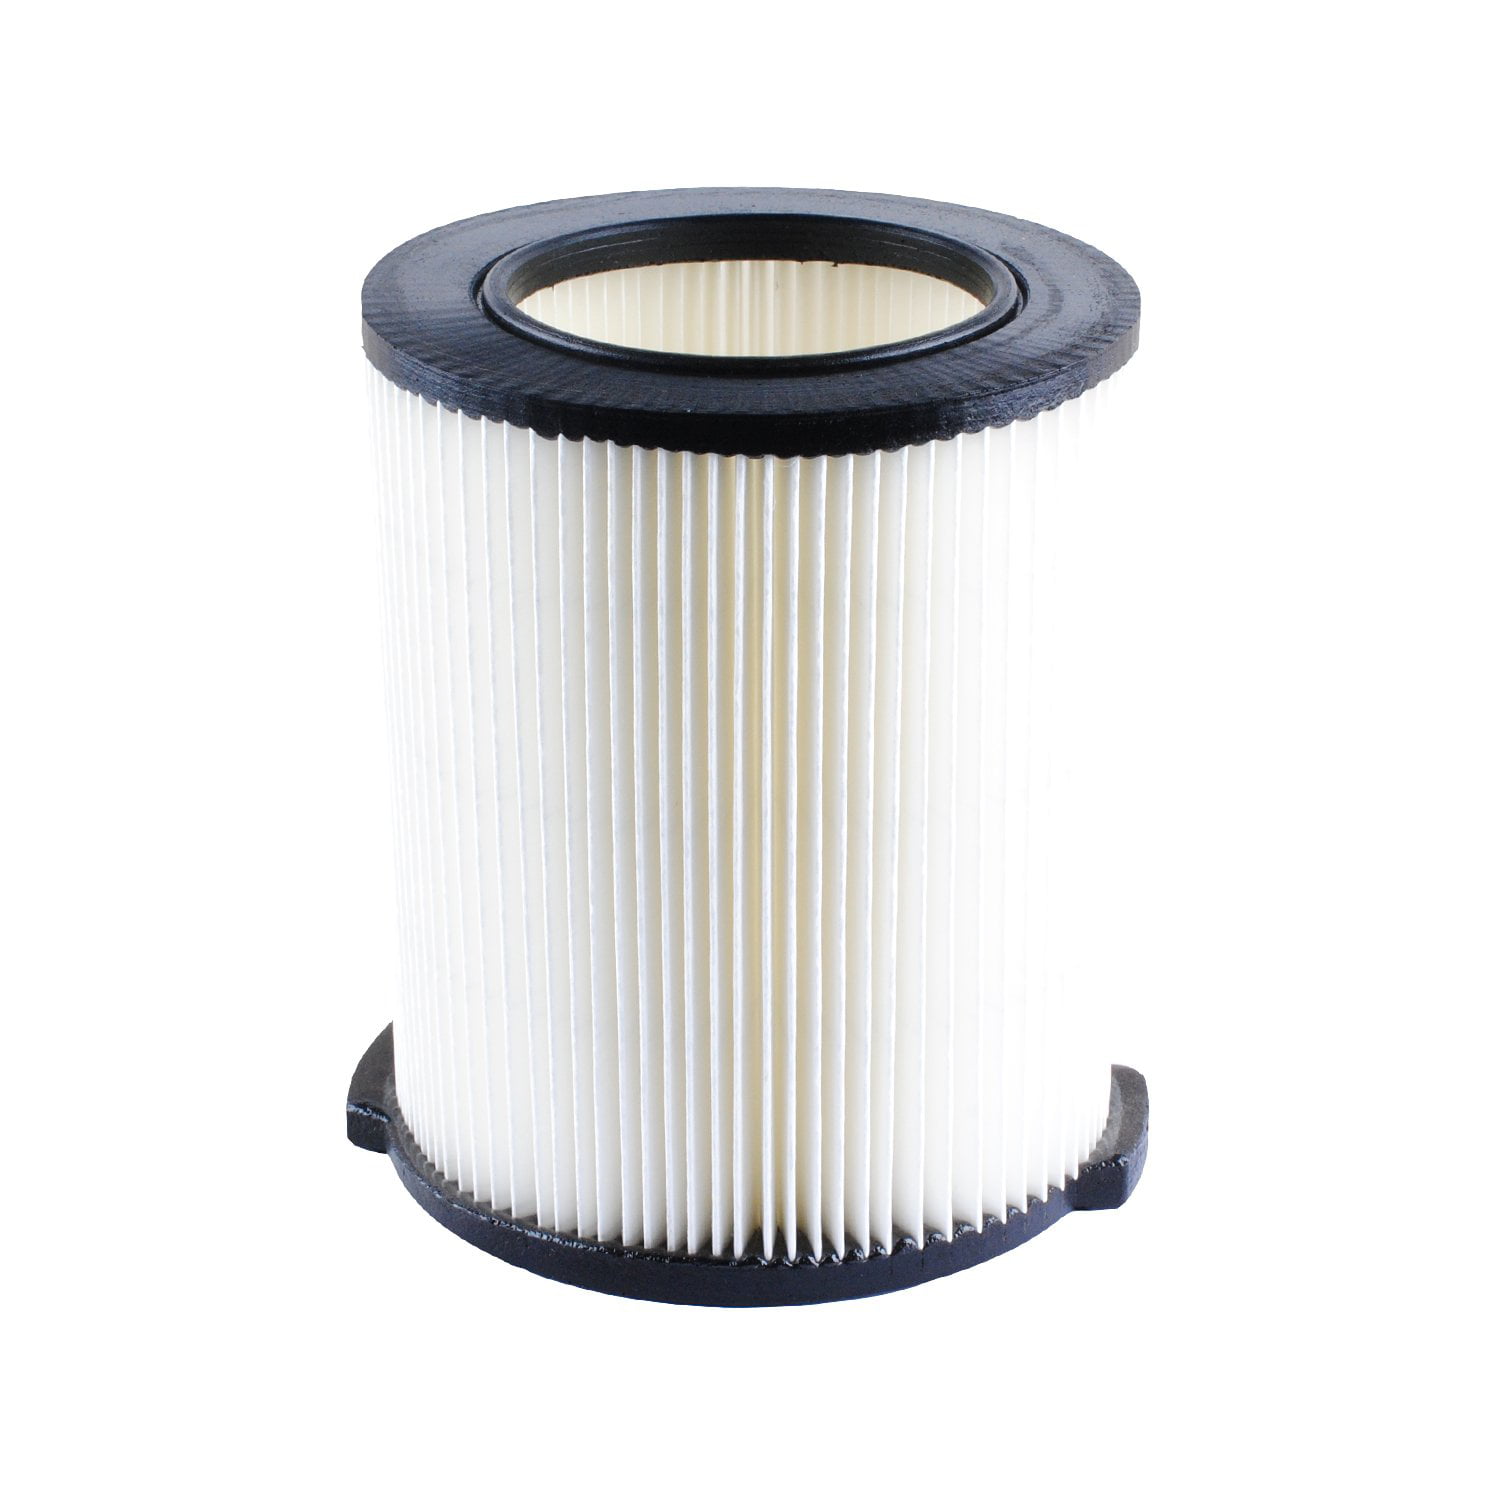 1-Layer Cartridge Filter Part # 72947 for RIDGID VF4000 Wet Dry Vacuums Washable 